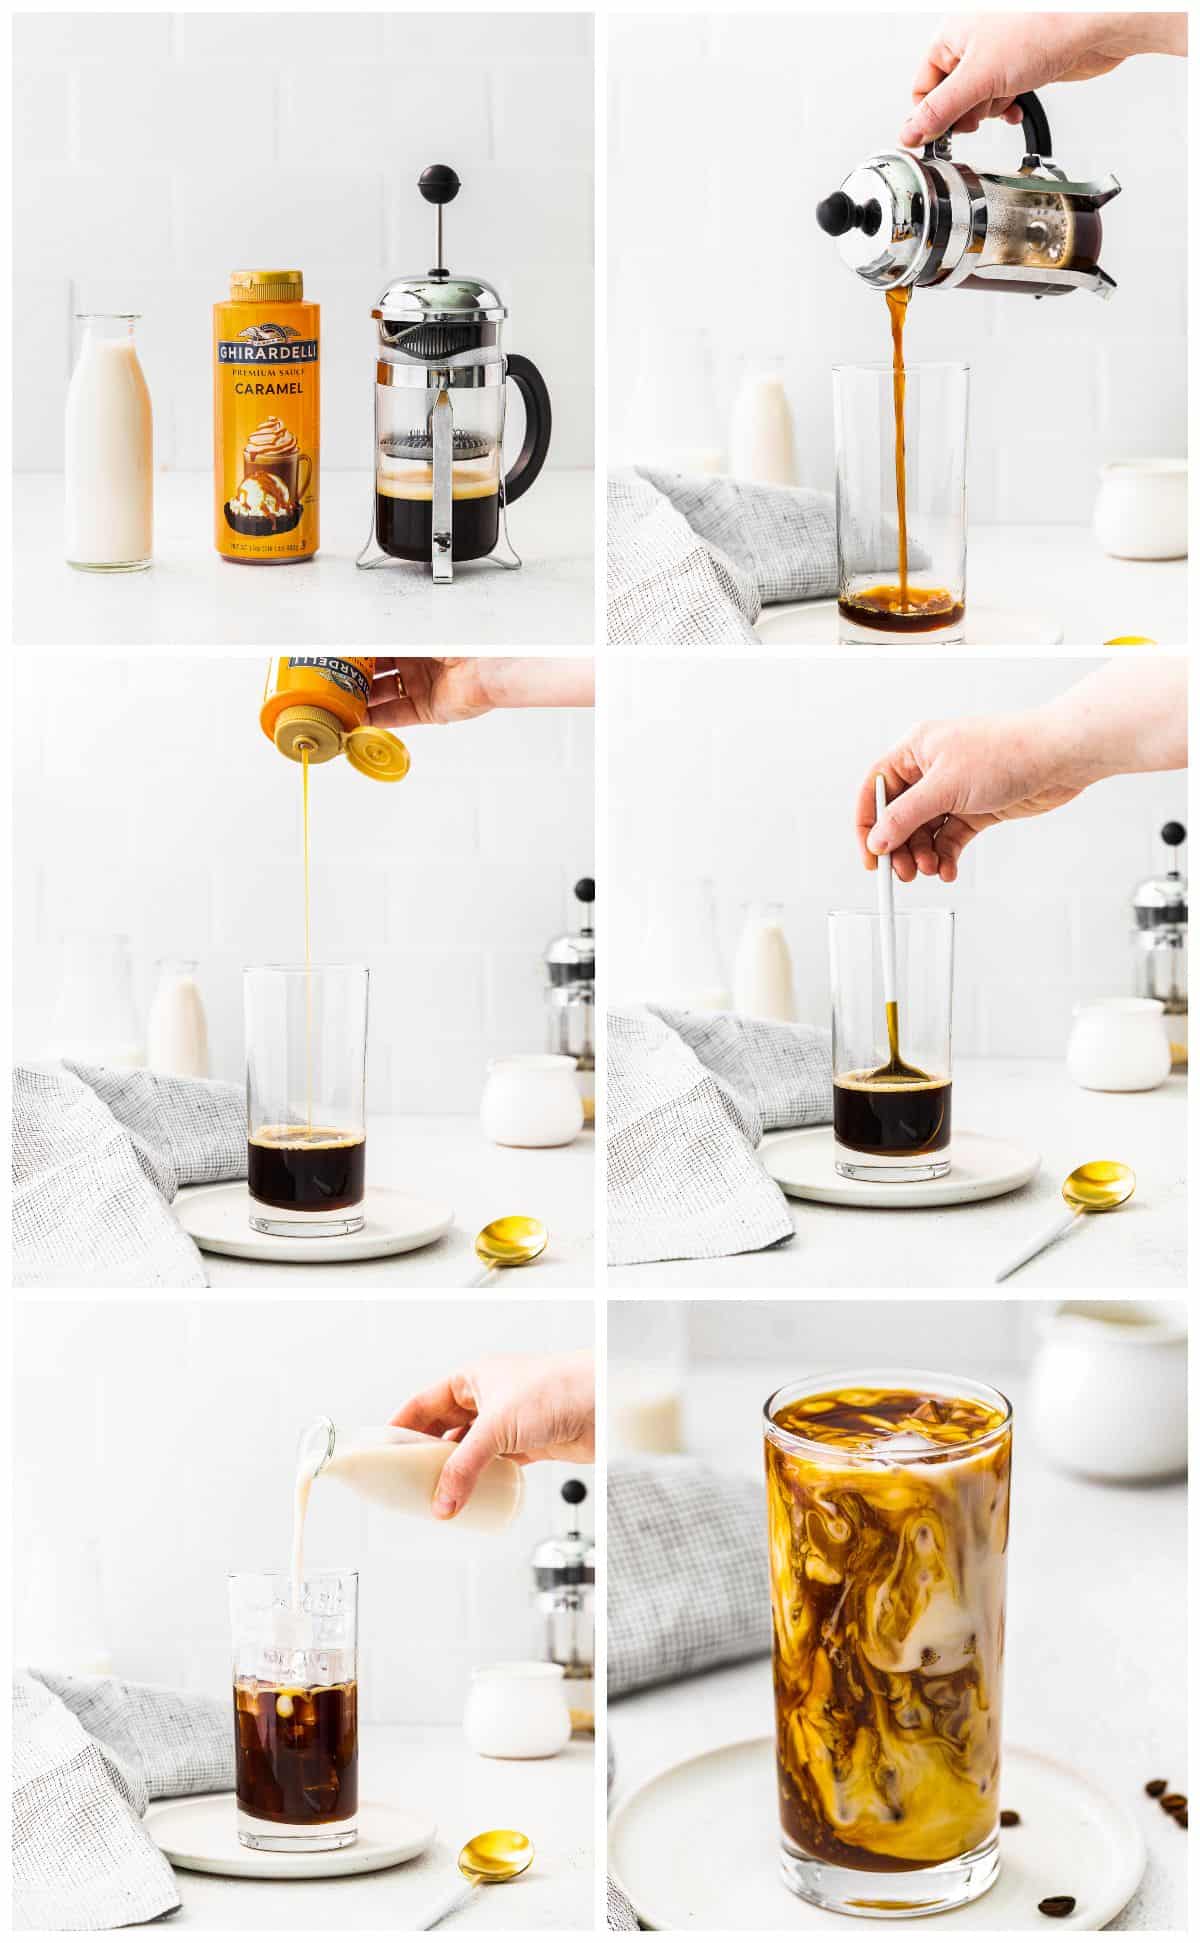 https://www.thecookierookie.com/wp-content/uploads/2021/09/step-by-step-photos-for-how-to-make-iced-caramel-lattes.jpg